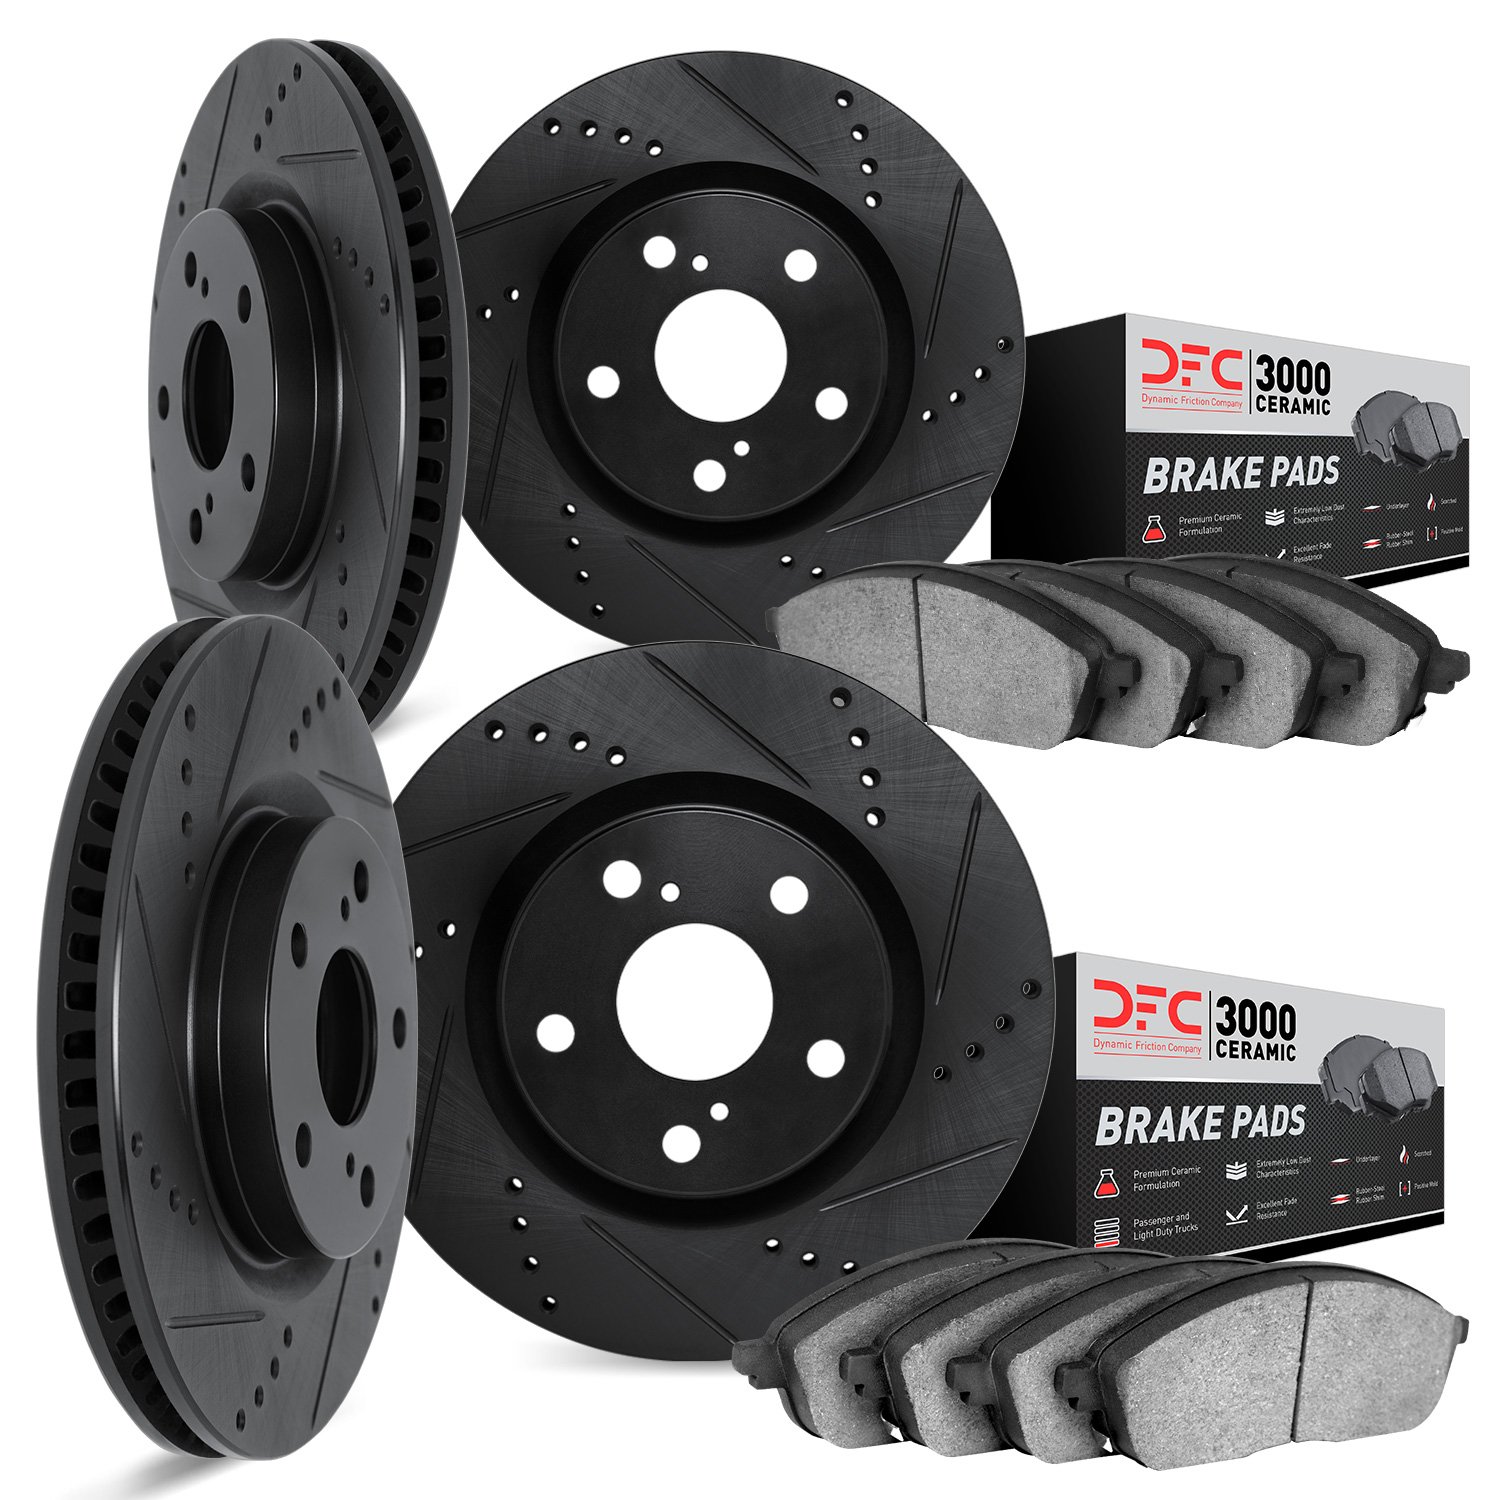 8304-13029 Drilled/Slotted Brake Rotors with 3000-Series Ceramic Brake Pads Kit [Black], 2003-2004 Subaru, Position: Front and R